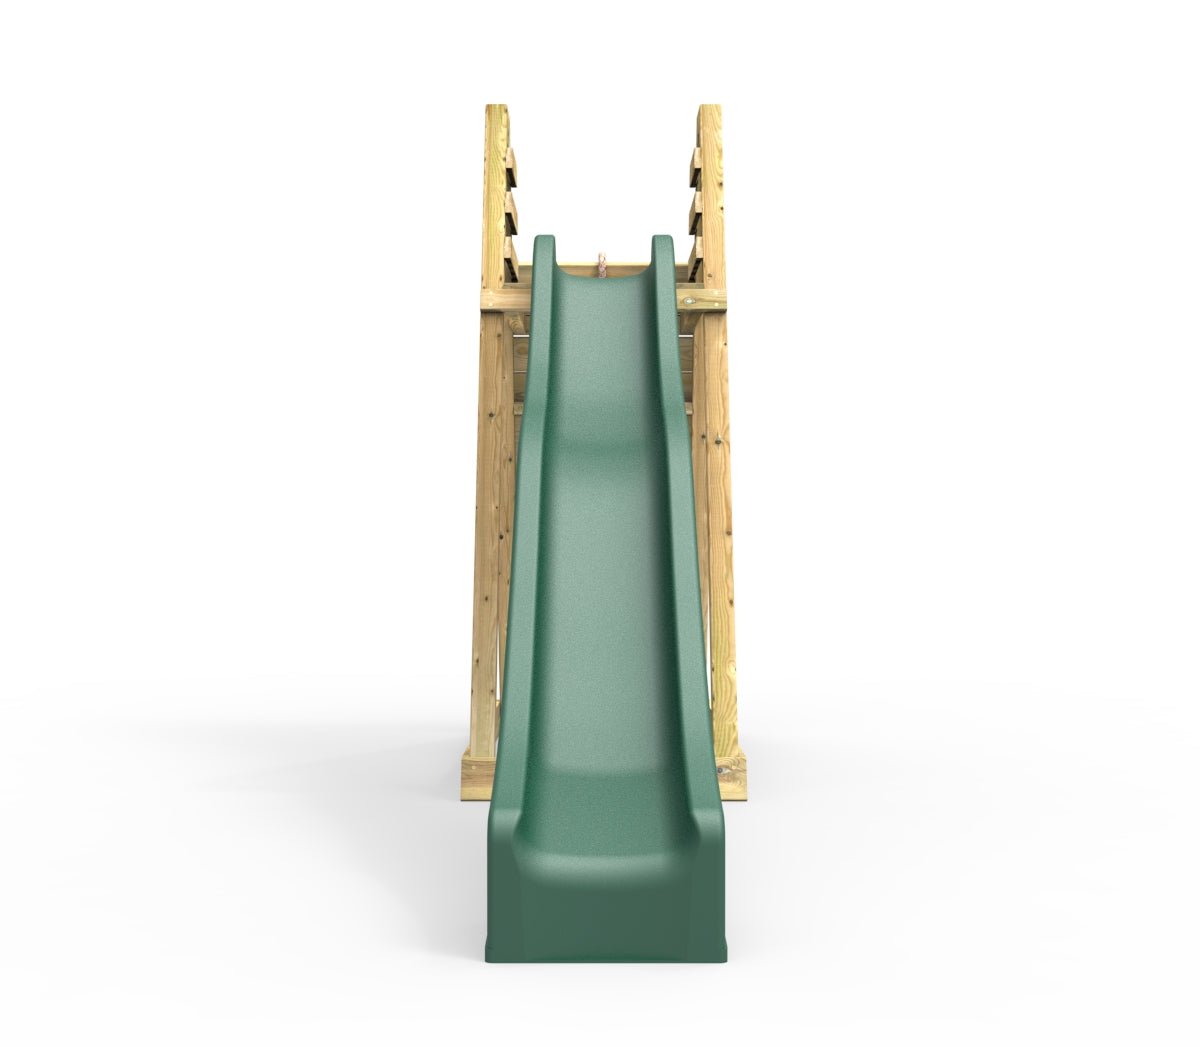 Rebo Wooden Free Standing Slide with 10ft Water Slide - with Adventure Wall